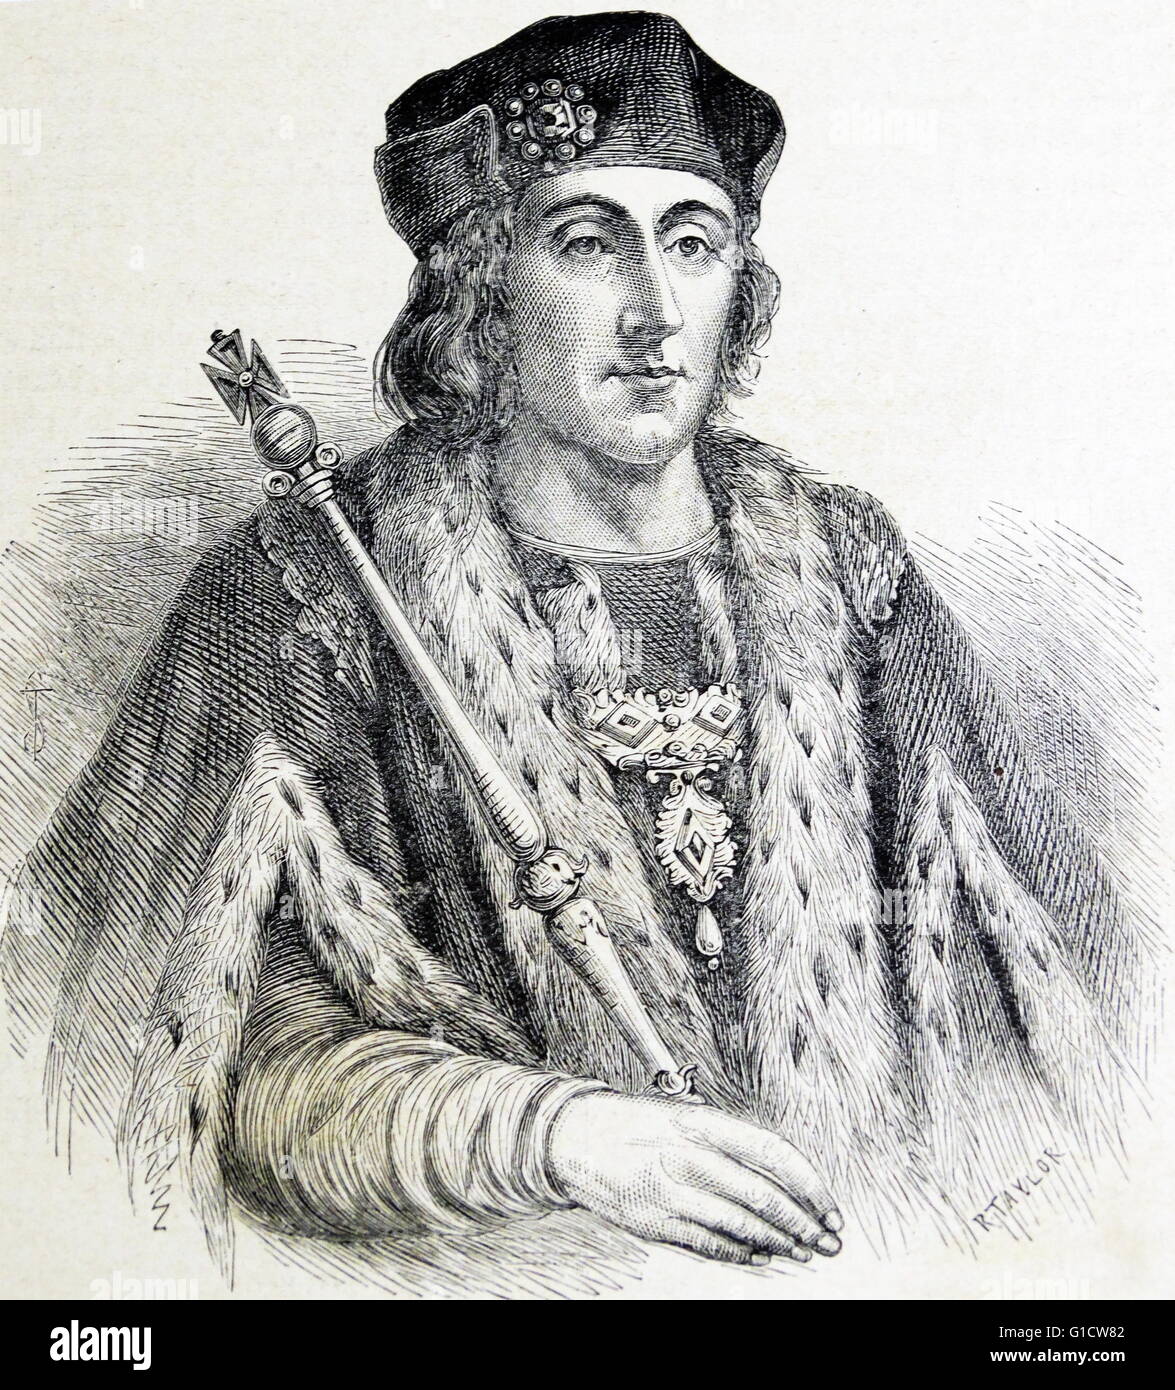 Engraved portrait of King Henry VII (1457-1509) King of England and the first Tudor monarch. Dated 15th Century Stock Photo